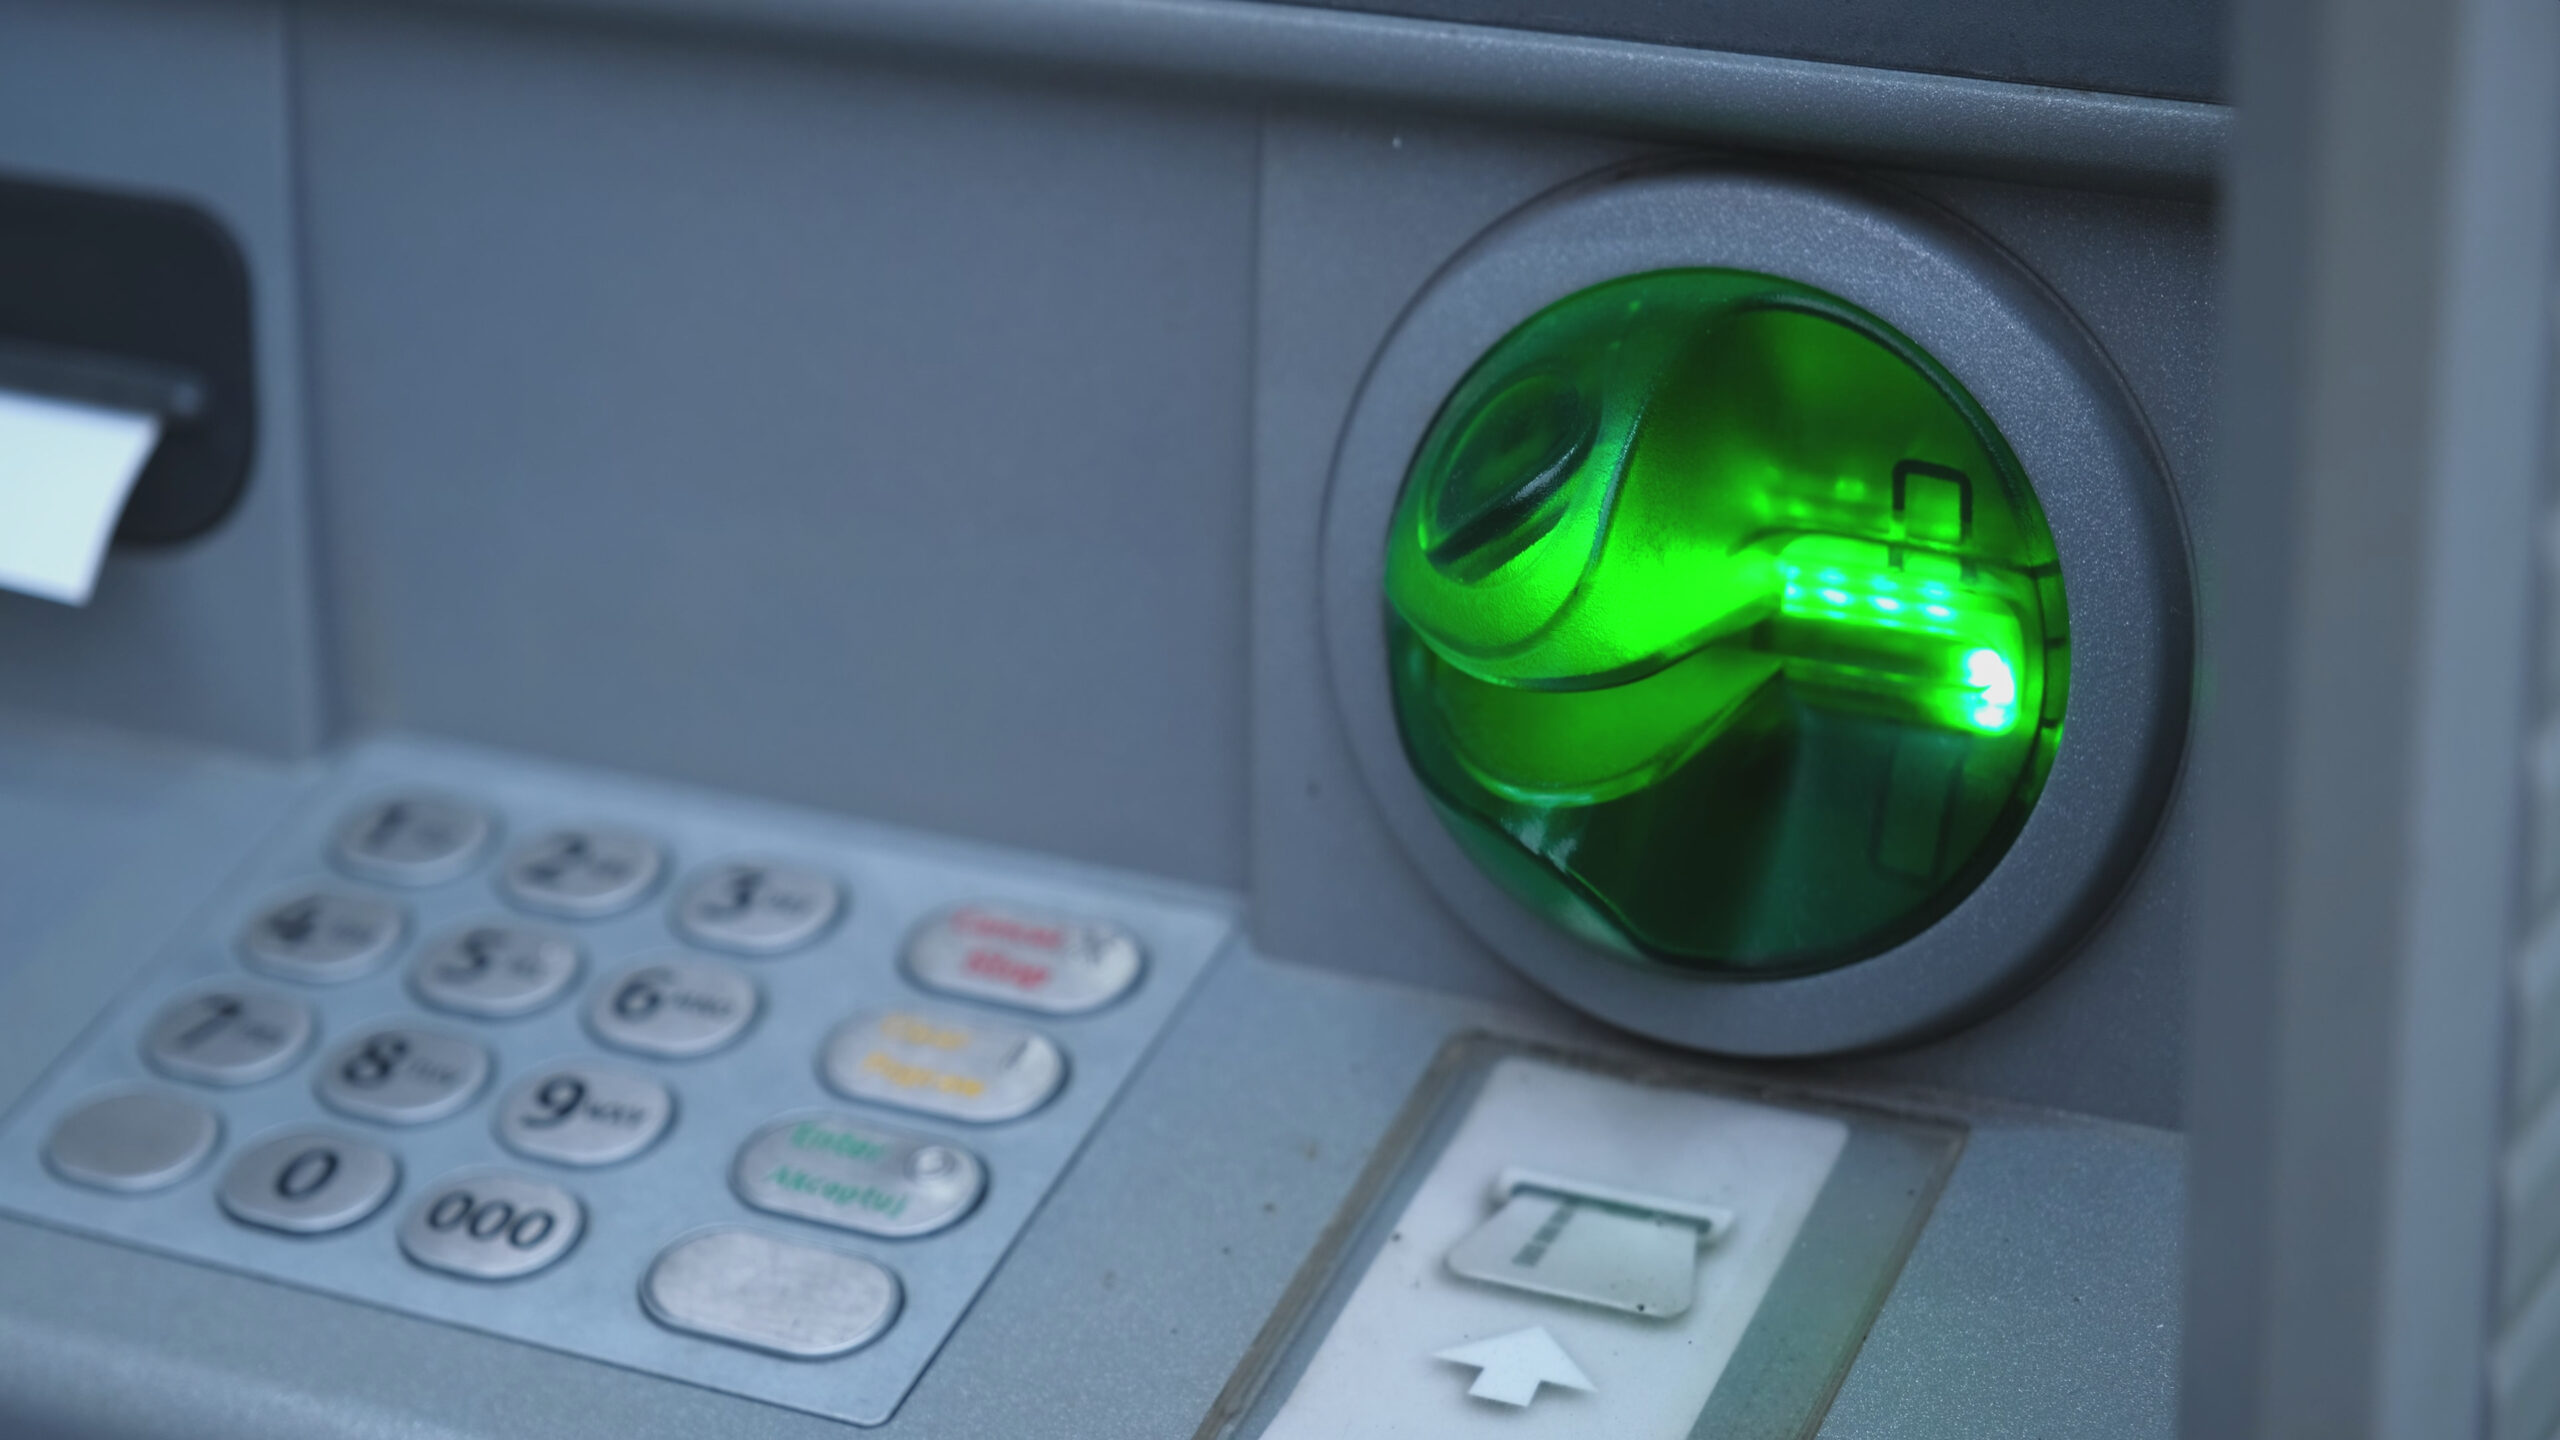 Steps to protect yourself from card skimming scams